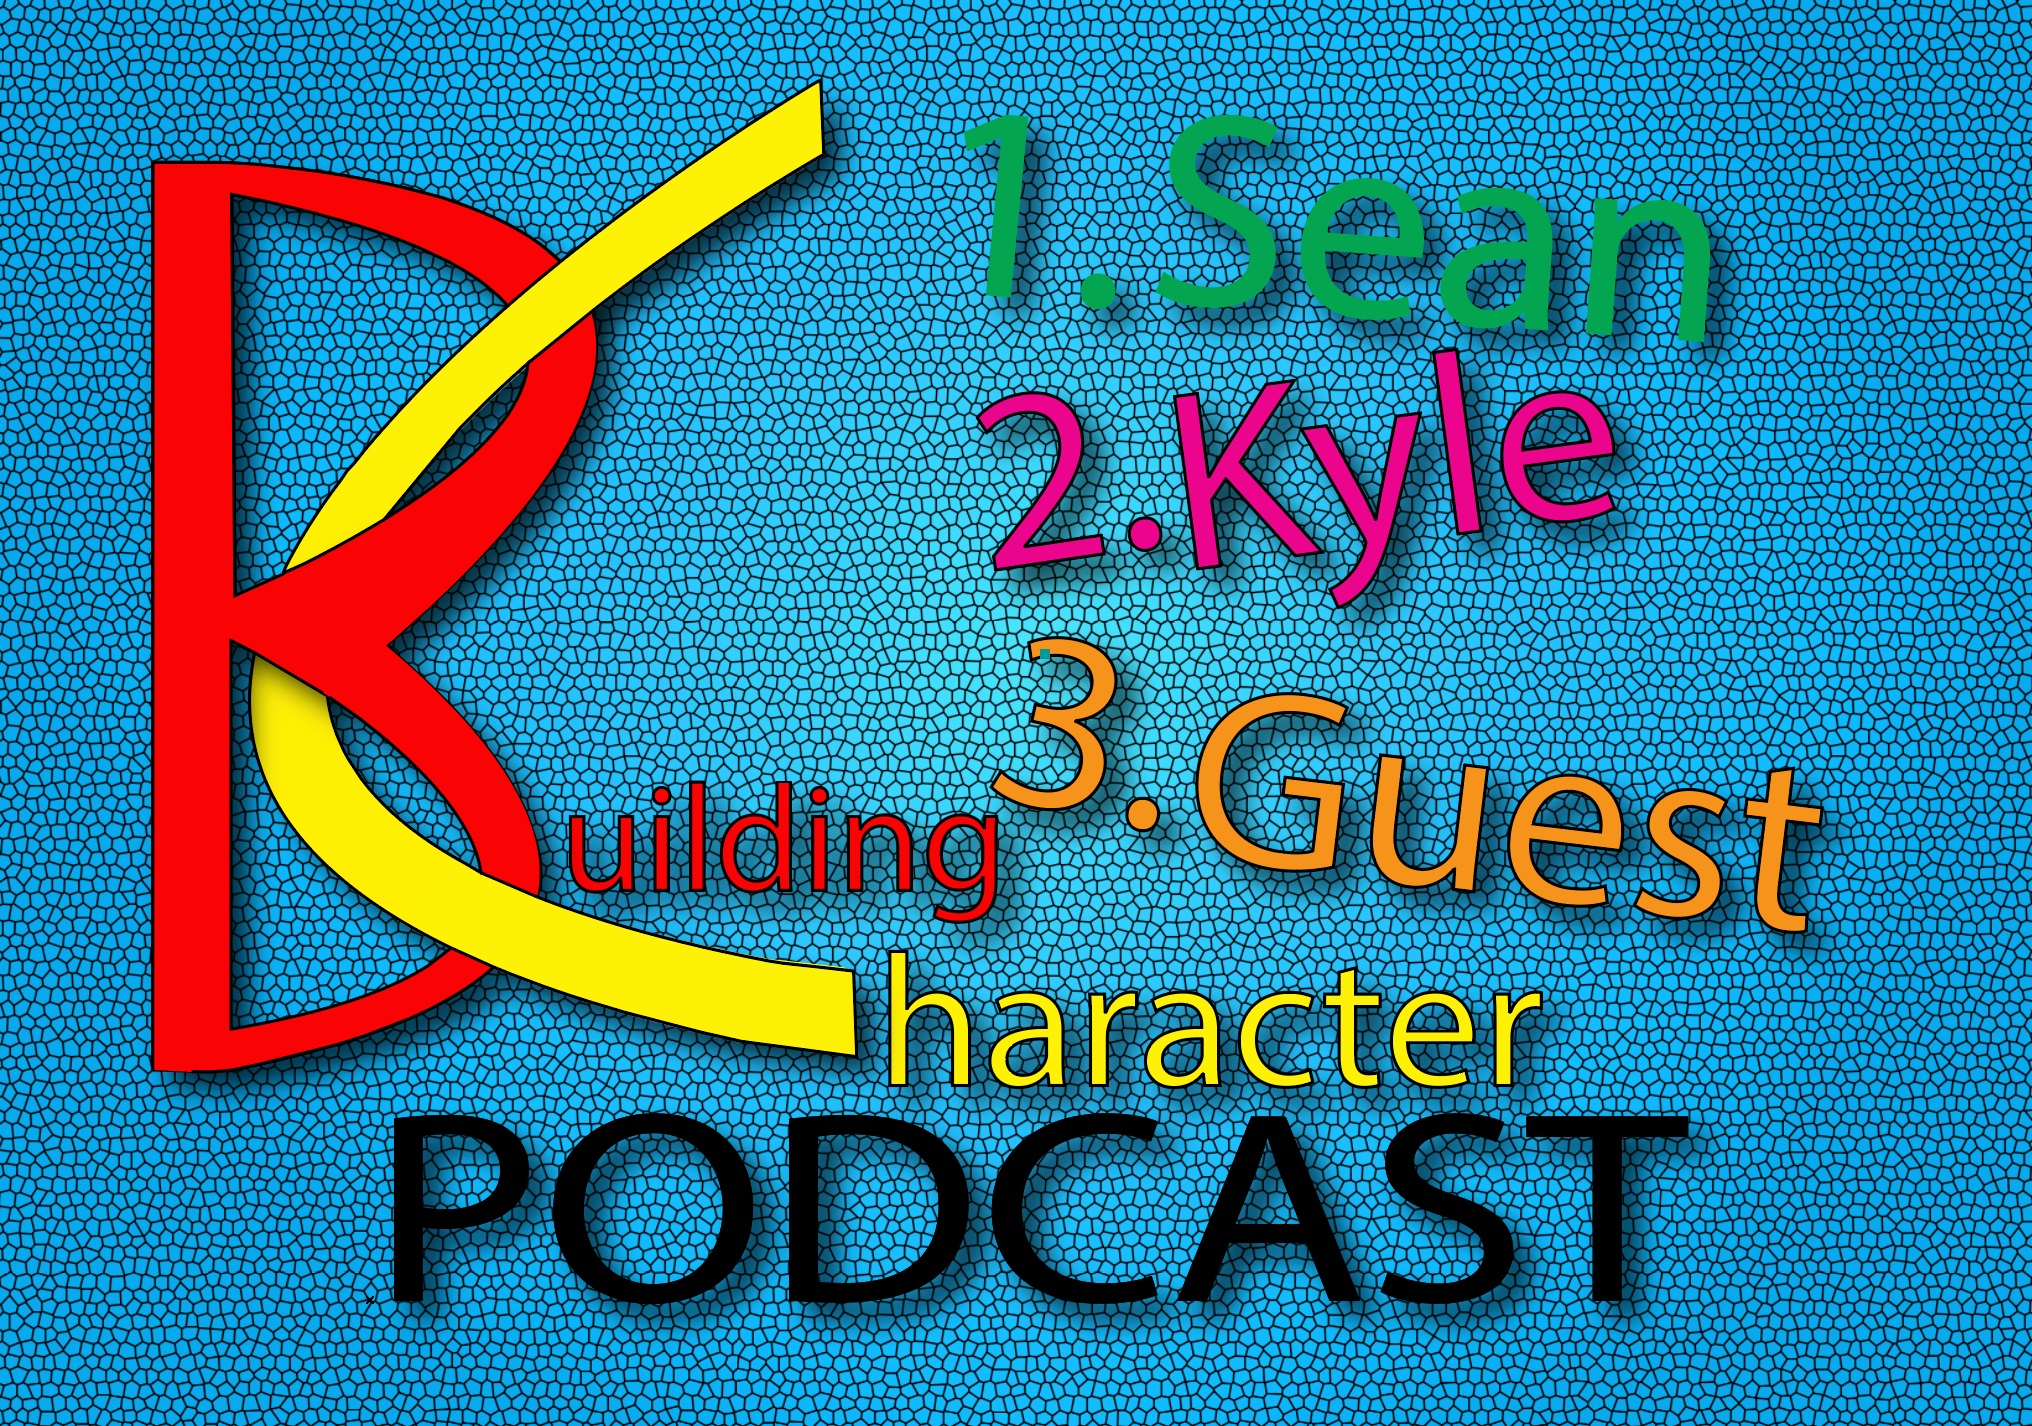 Building Character Podcast